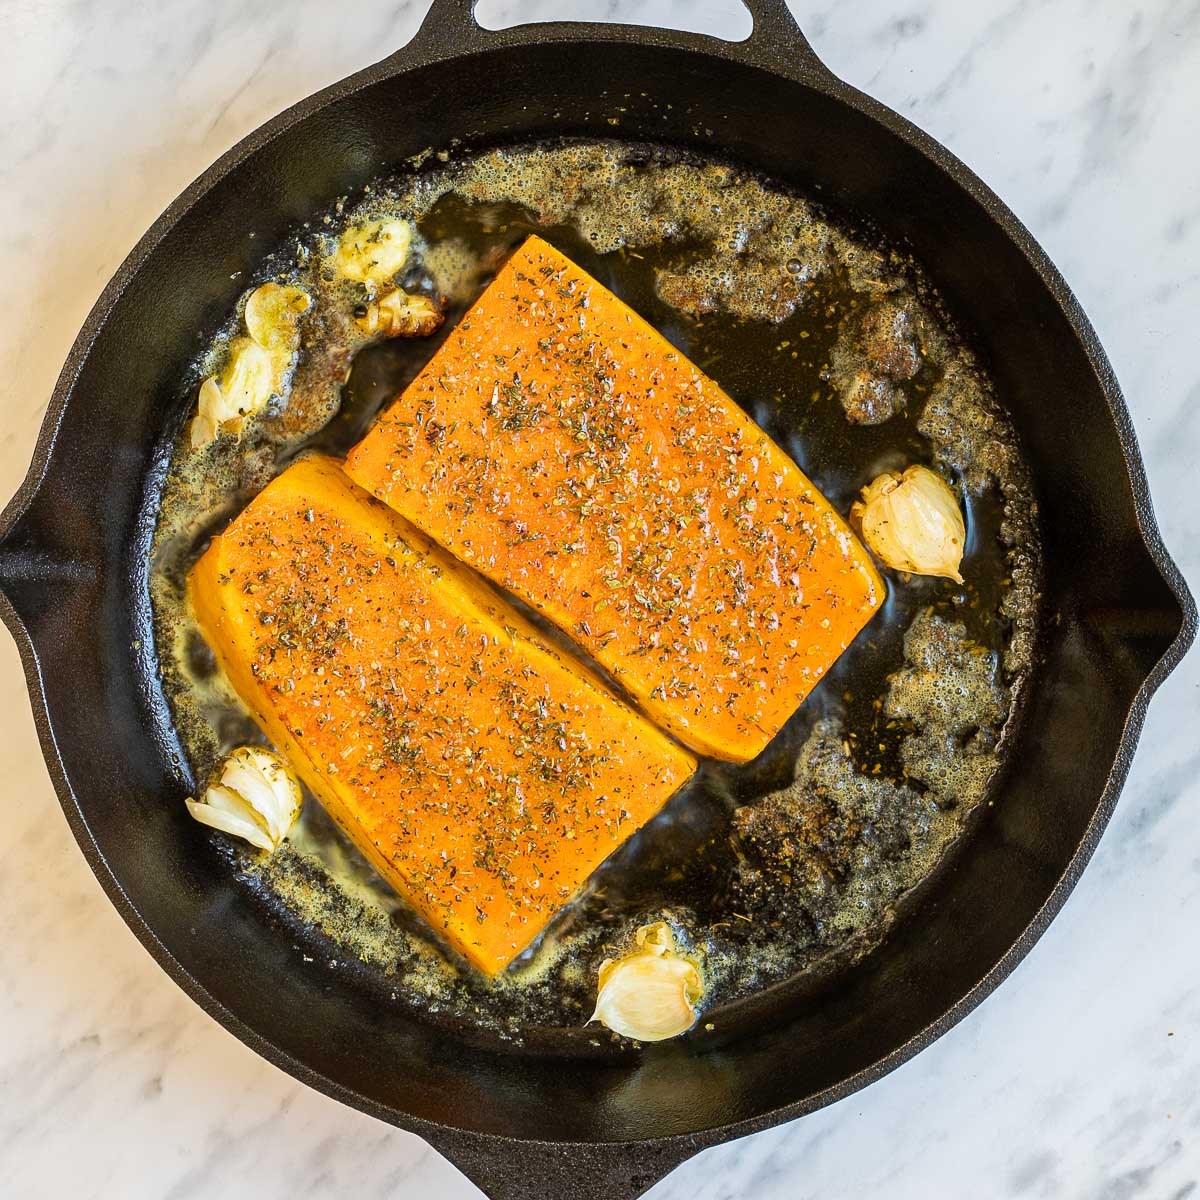 Cast iron skillet with two large squash slices and some garlic cloves in bubbling melted butter. 